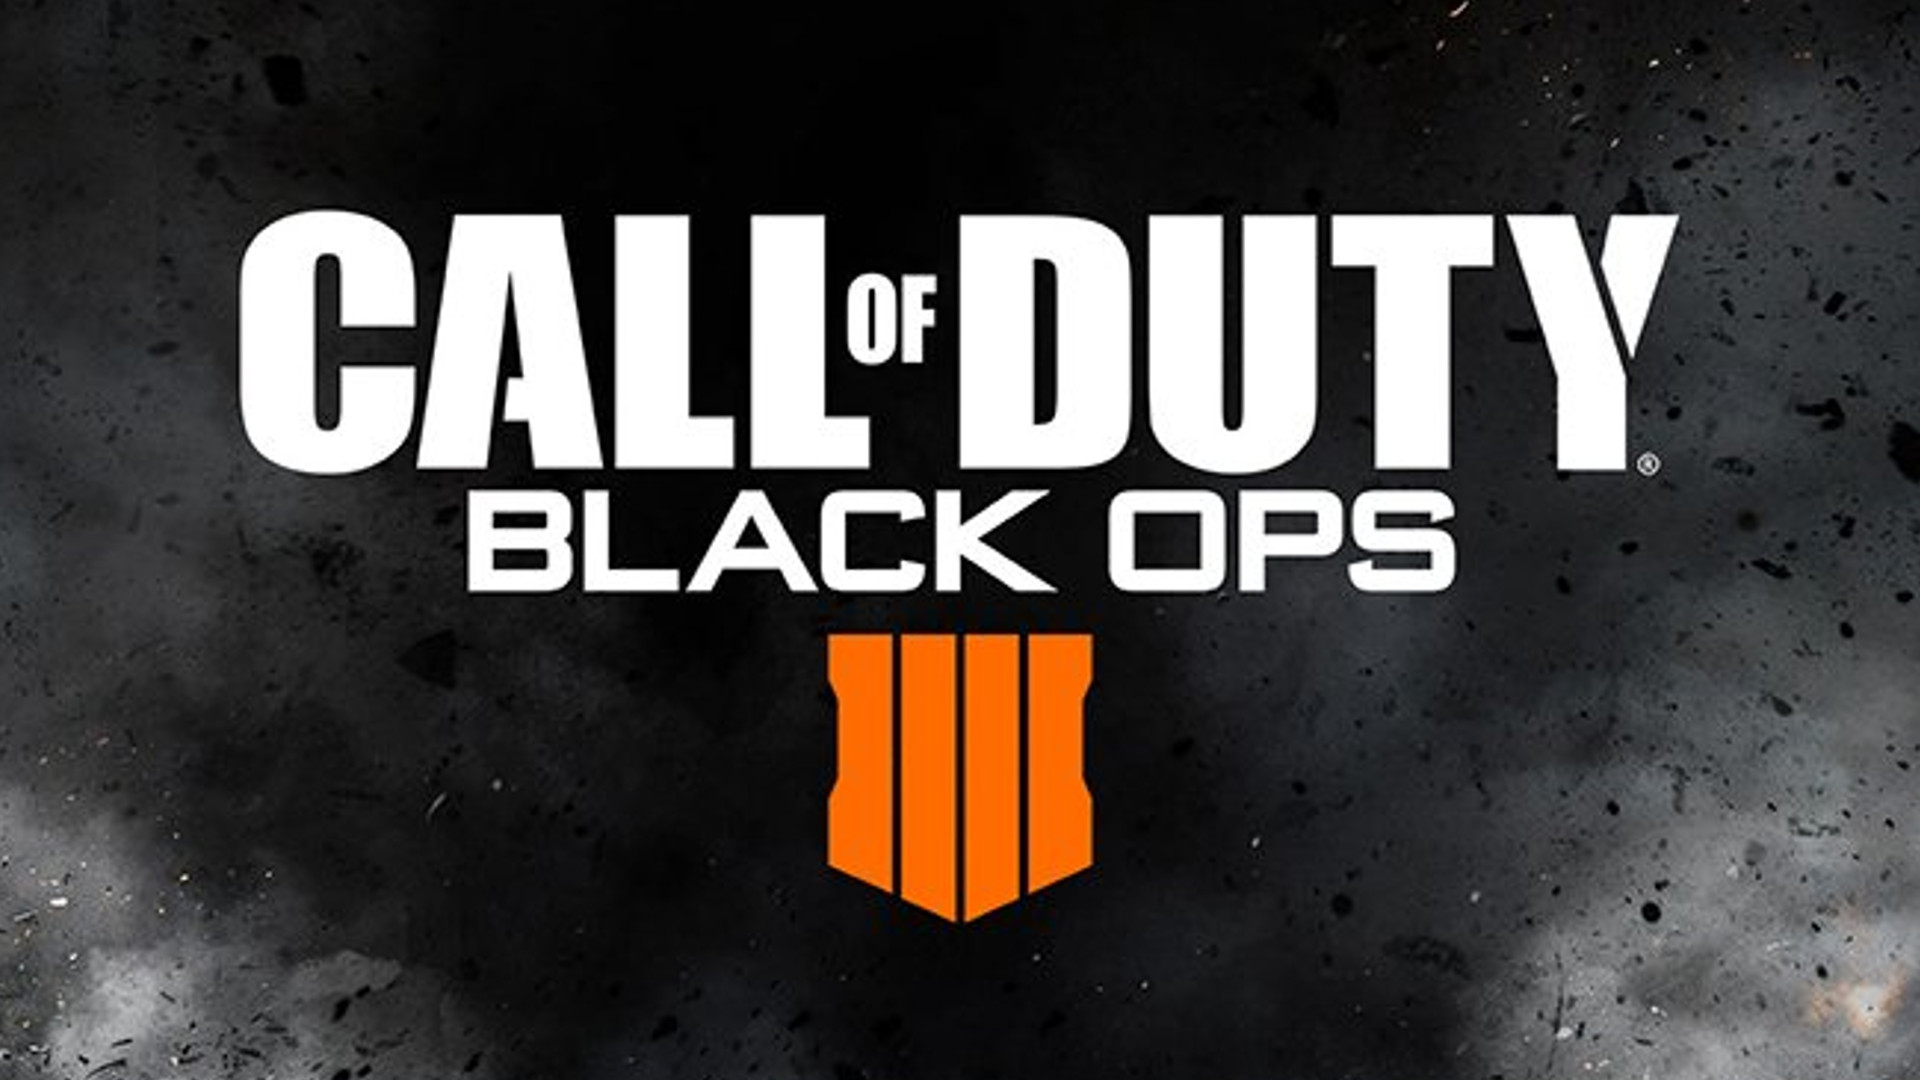 Call of duty black ops 2 ppsspp download